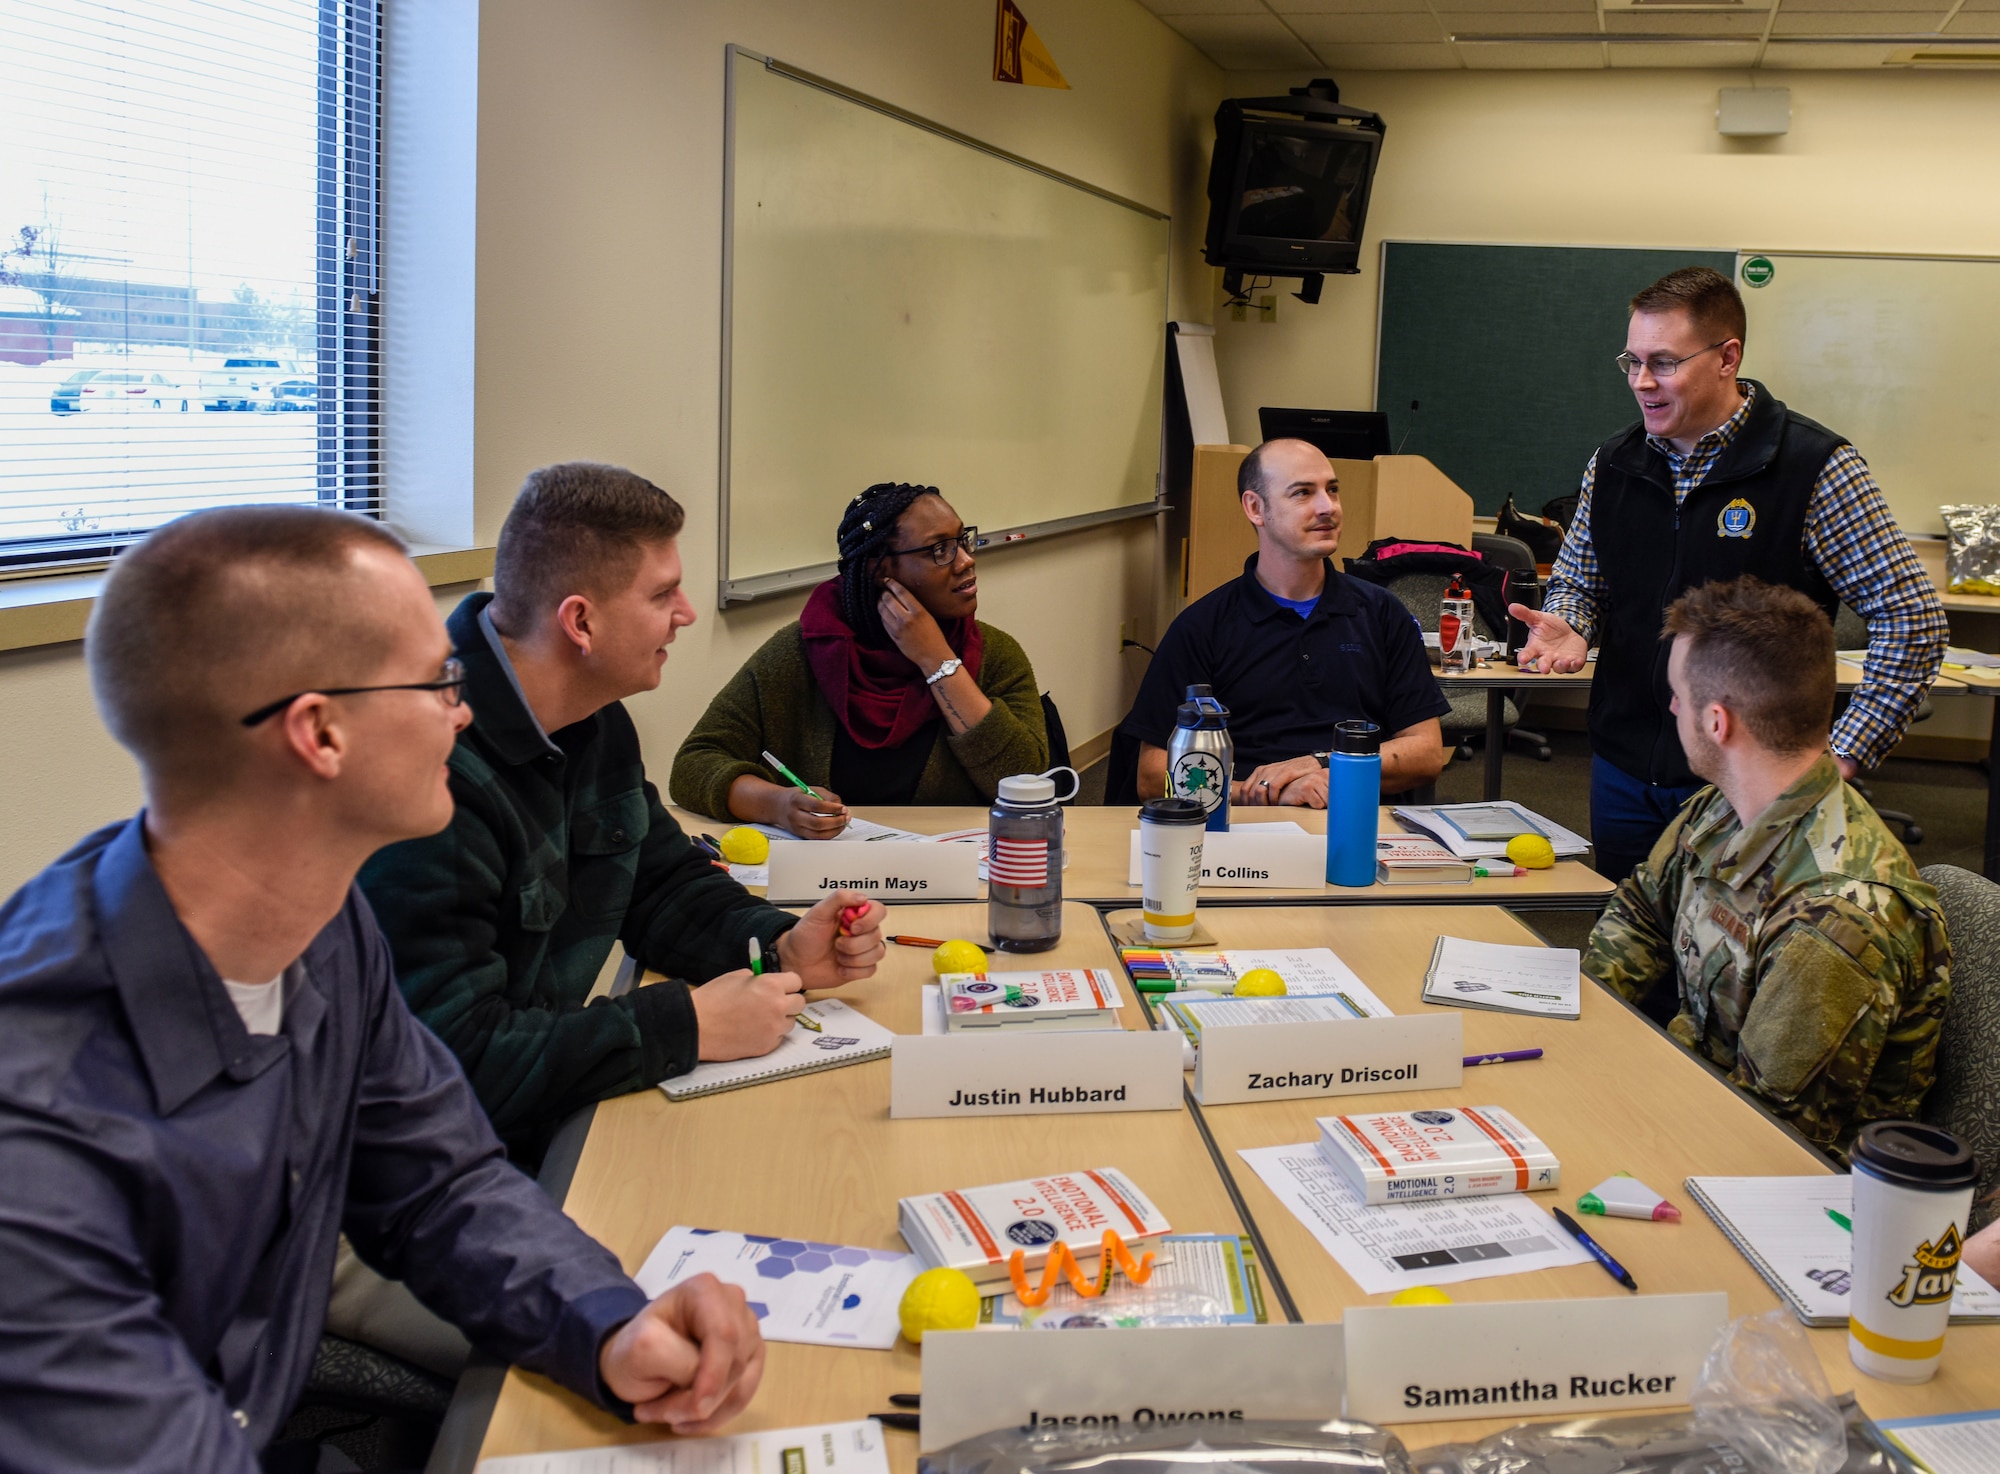 U.S. Air Force Col. J. Scot Heathman, 92nd Air Refueling Wing vice commander, engages in a class discussion with Airmen during an Emotional Intelligence (EQ) class at Fairchild Air Force Base, Washington, Feb. 15, 2019. Fairchild provides installation employees the opportunity to enroll in a bimonthly EQ resiliency class. EQ teaches people how to enhance their emotional skills by helping them recognize and manage their emotions.
(U.S. Air Force photo/Senior Airman Jesenia Landaverde)